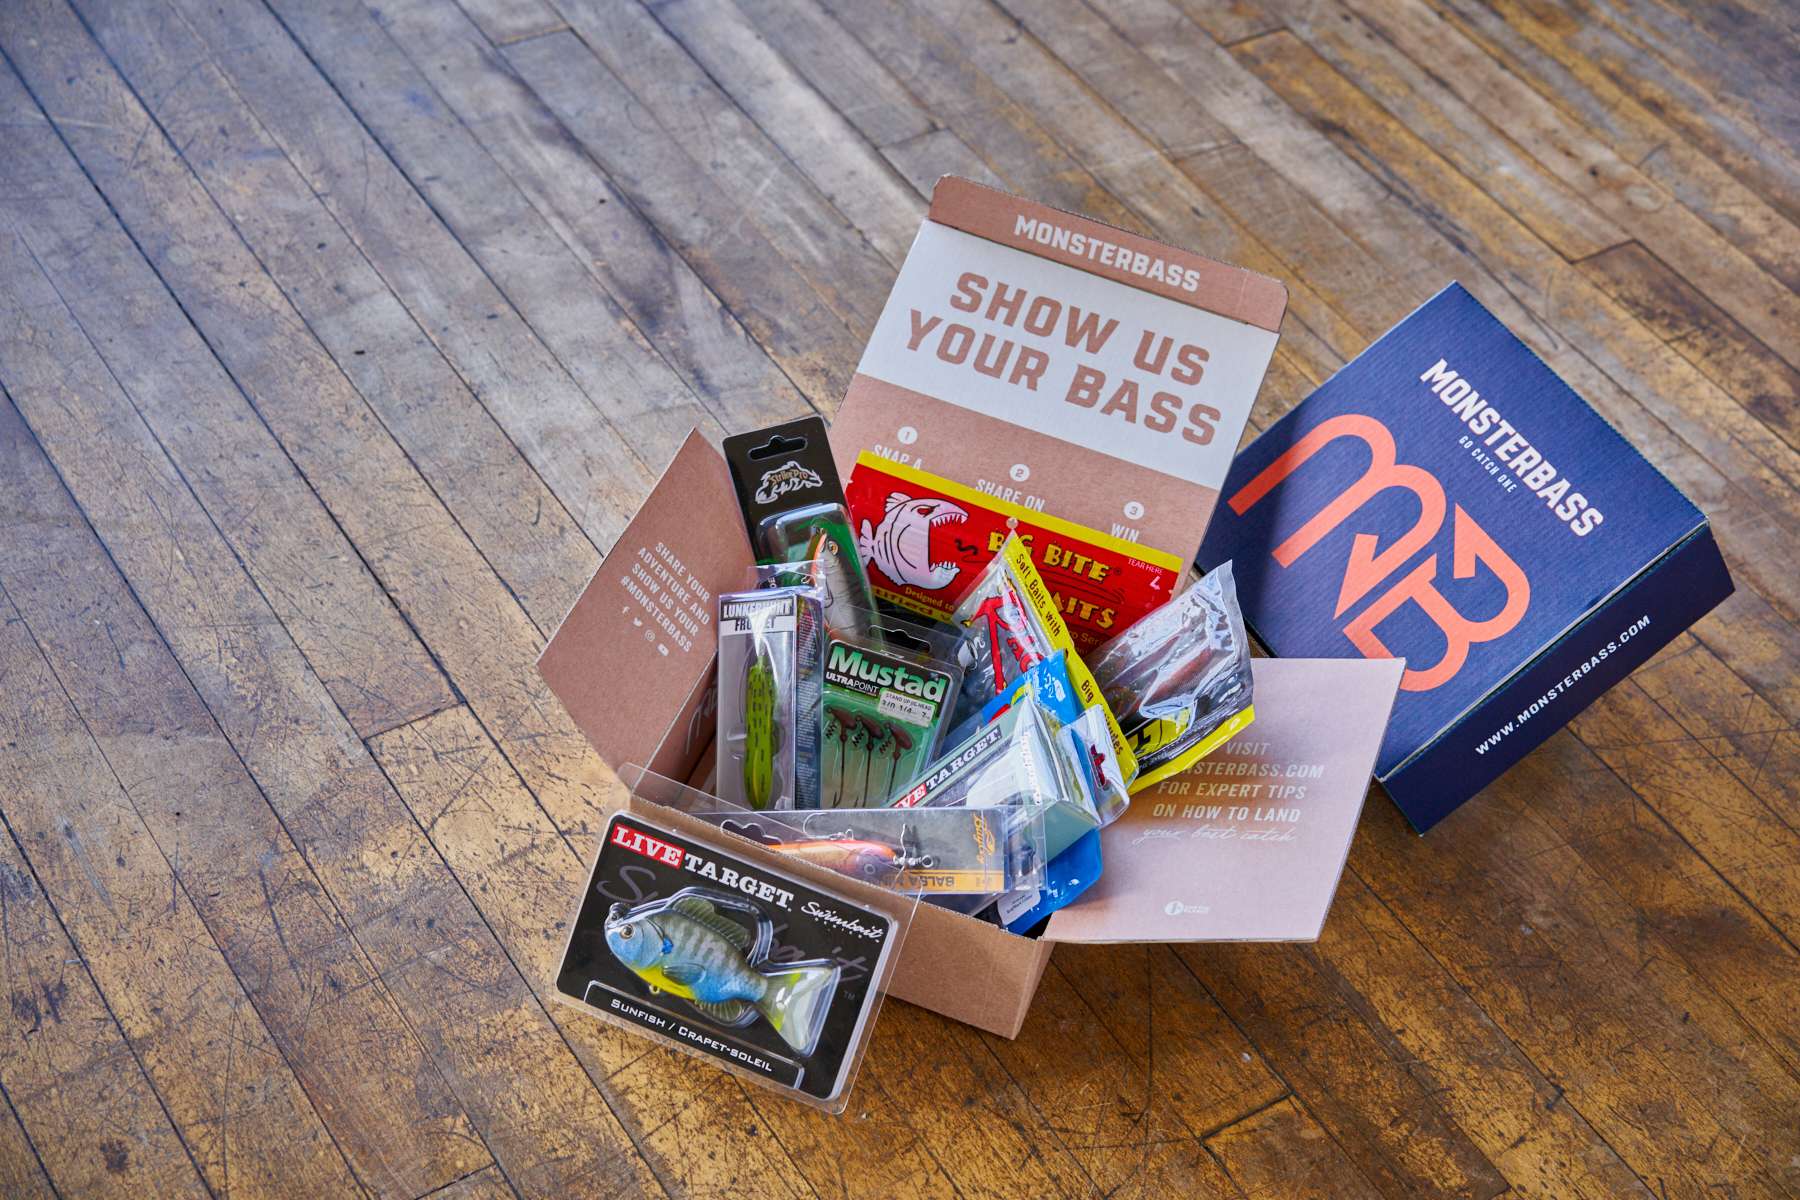 MONSTERBASS to launch new subscription box service - Bassmaster